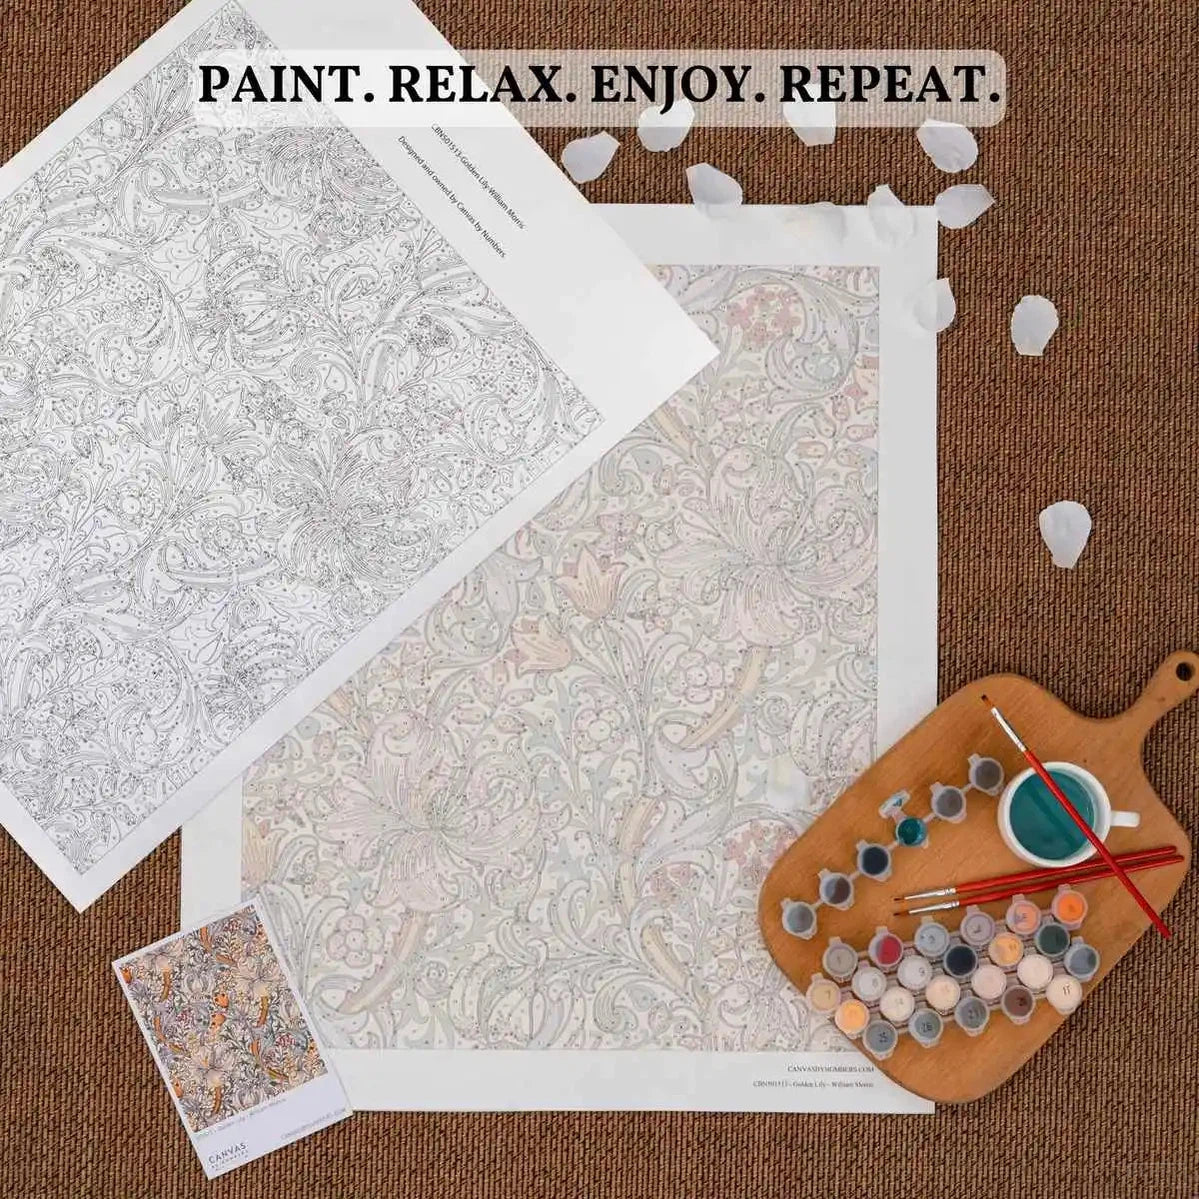 Beach Scene - Paint by Numbers-Beach Scene by James Hamilton is a relaxing paint by numbers with soothing colors for seascapes enthusiasts. Shop quality painting kits at CBN!-Canvas by Numbers